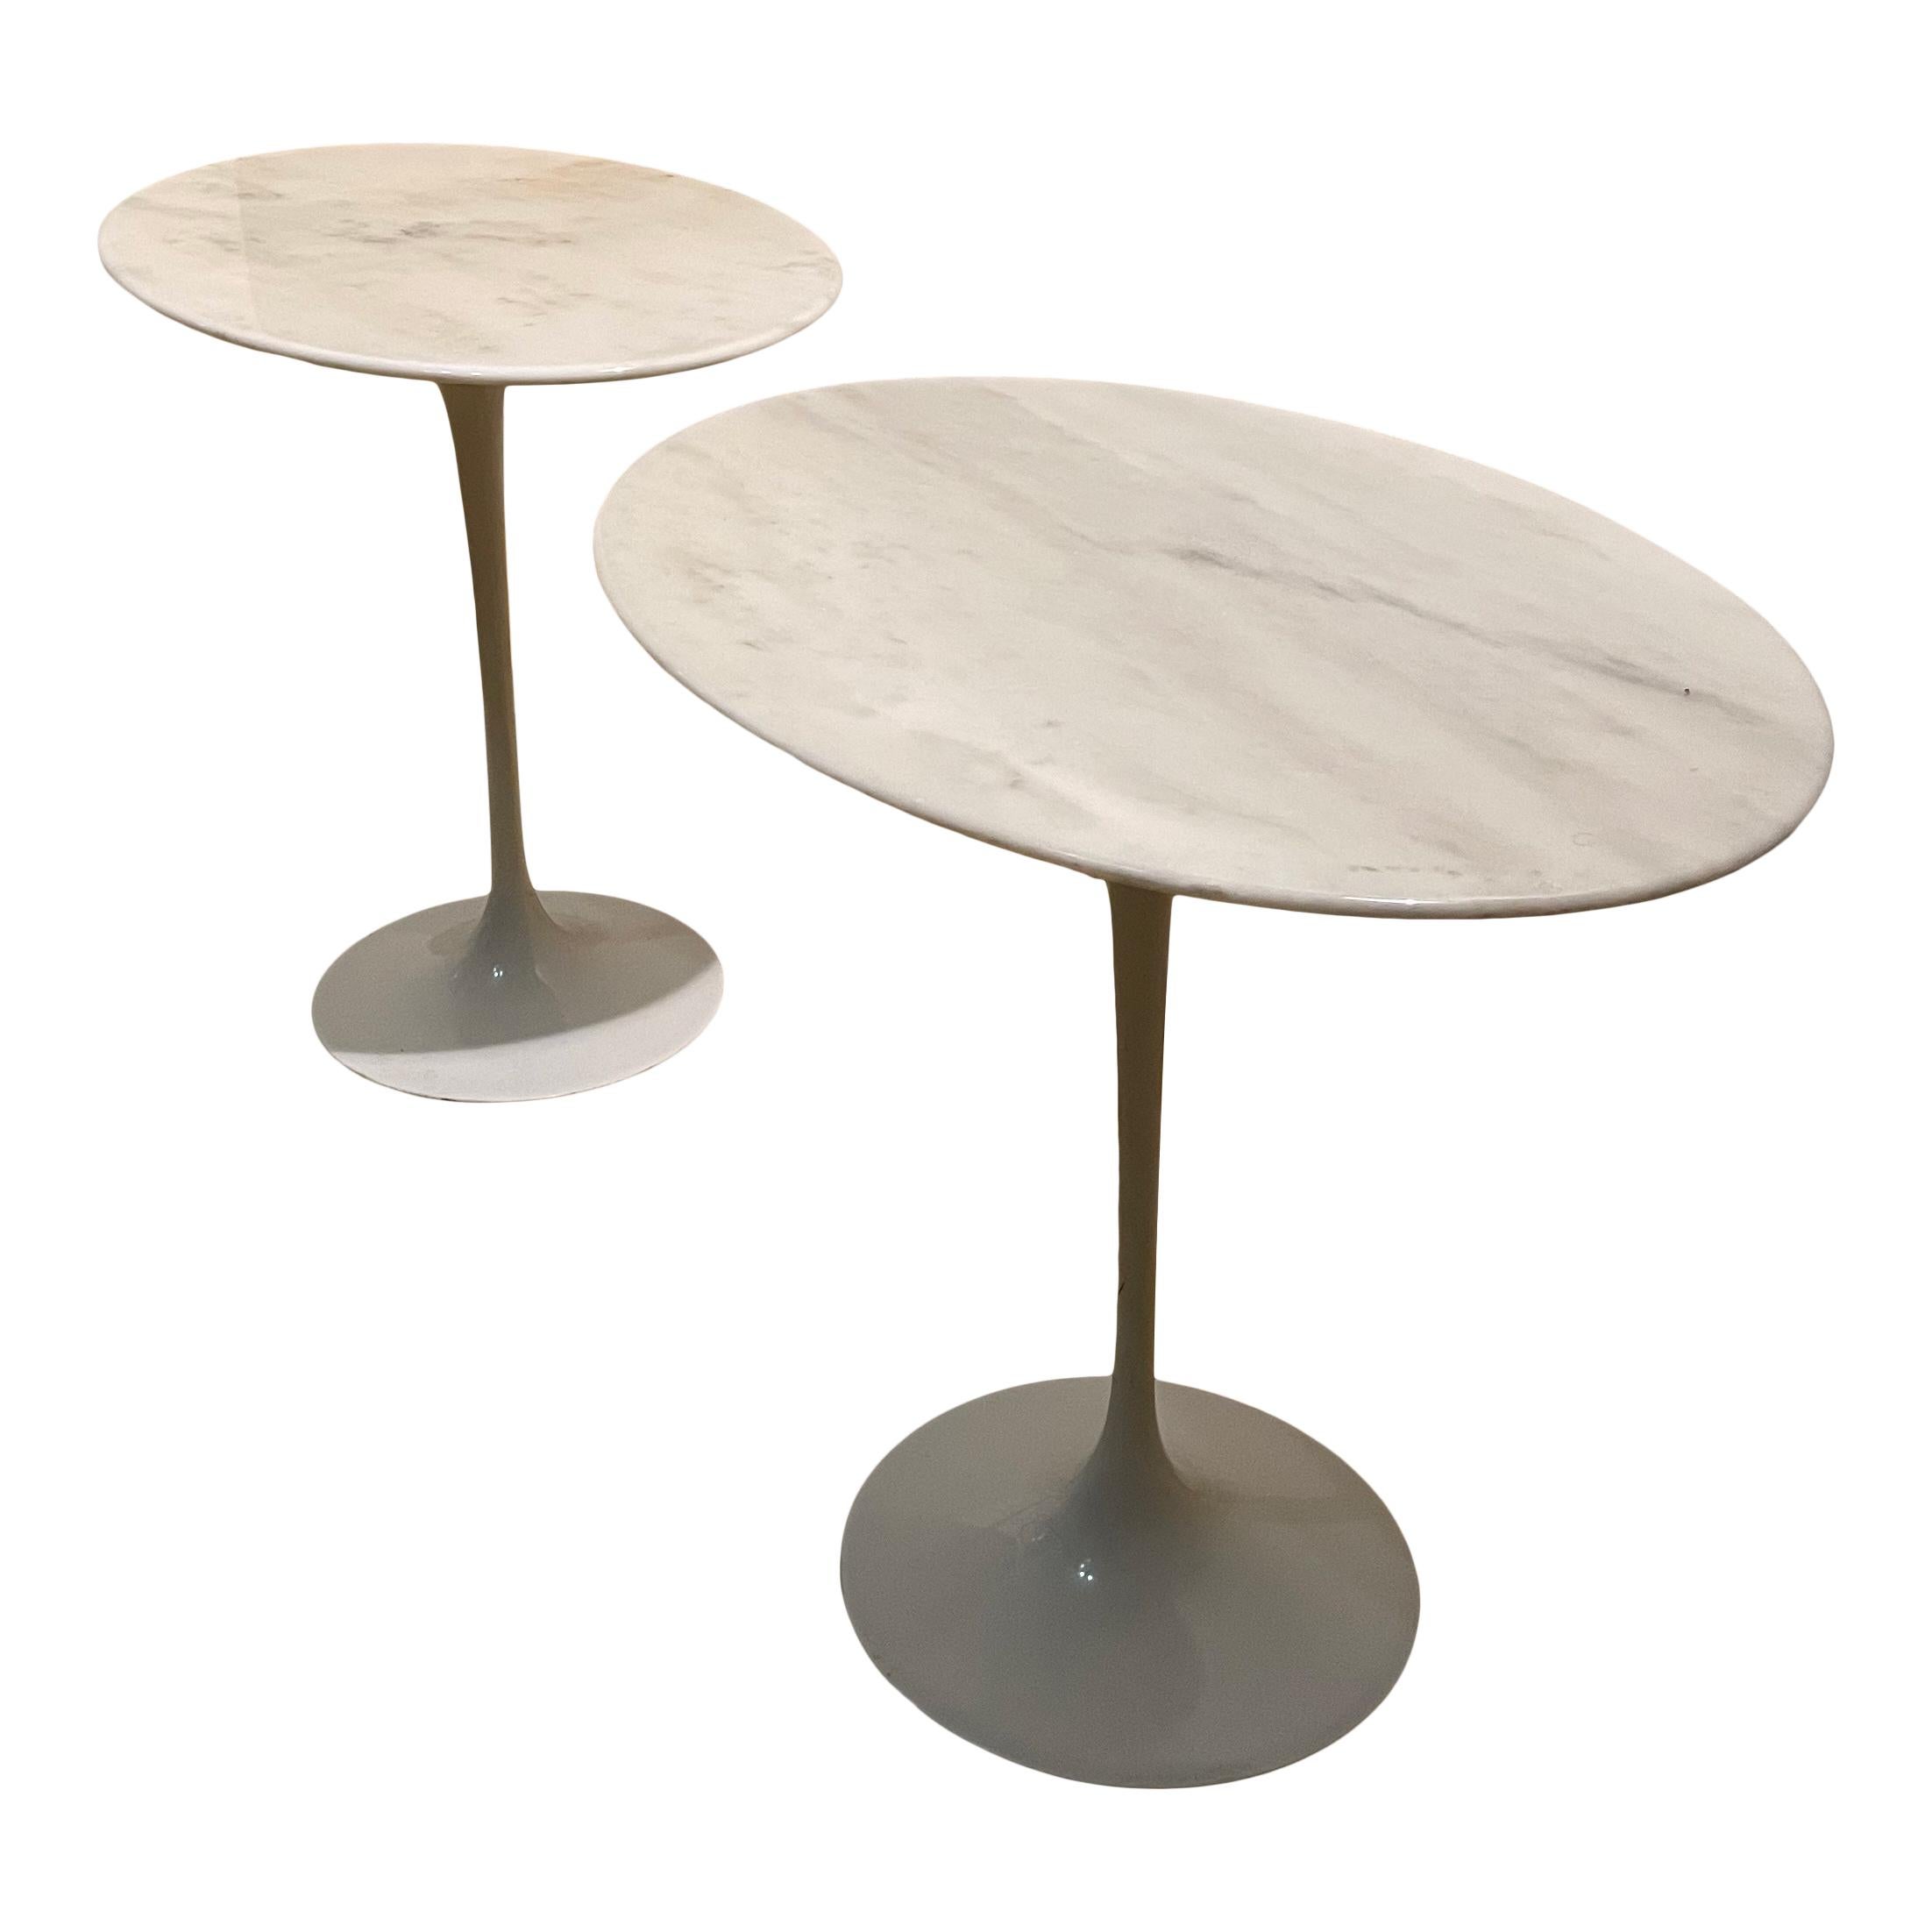 Lacquered Eero Saarinen Space Age Marble Tulip Nightstand for Knoll, 1967, Set of 2 For Sale